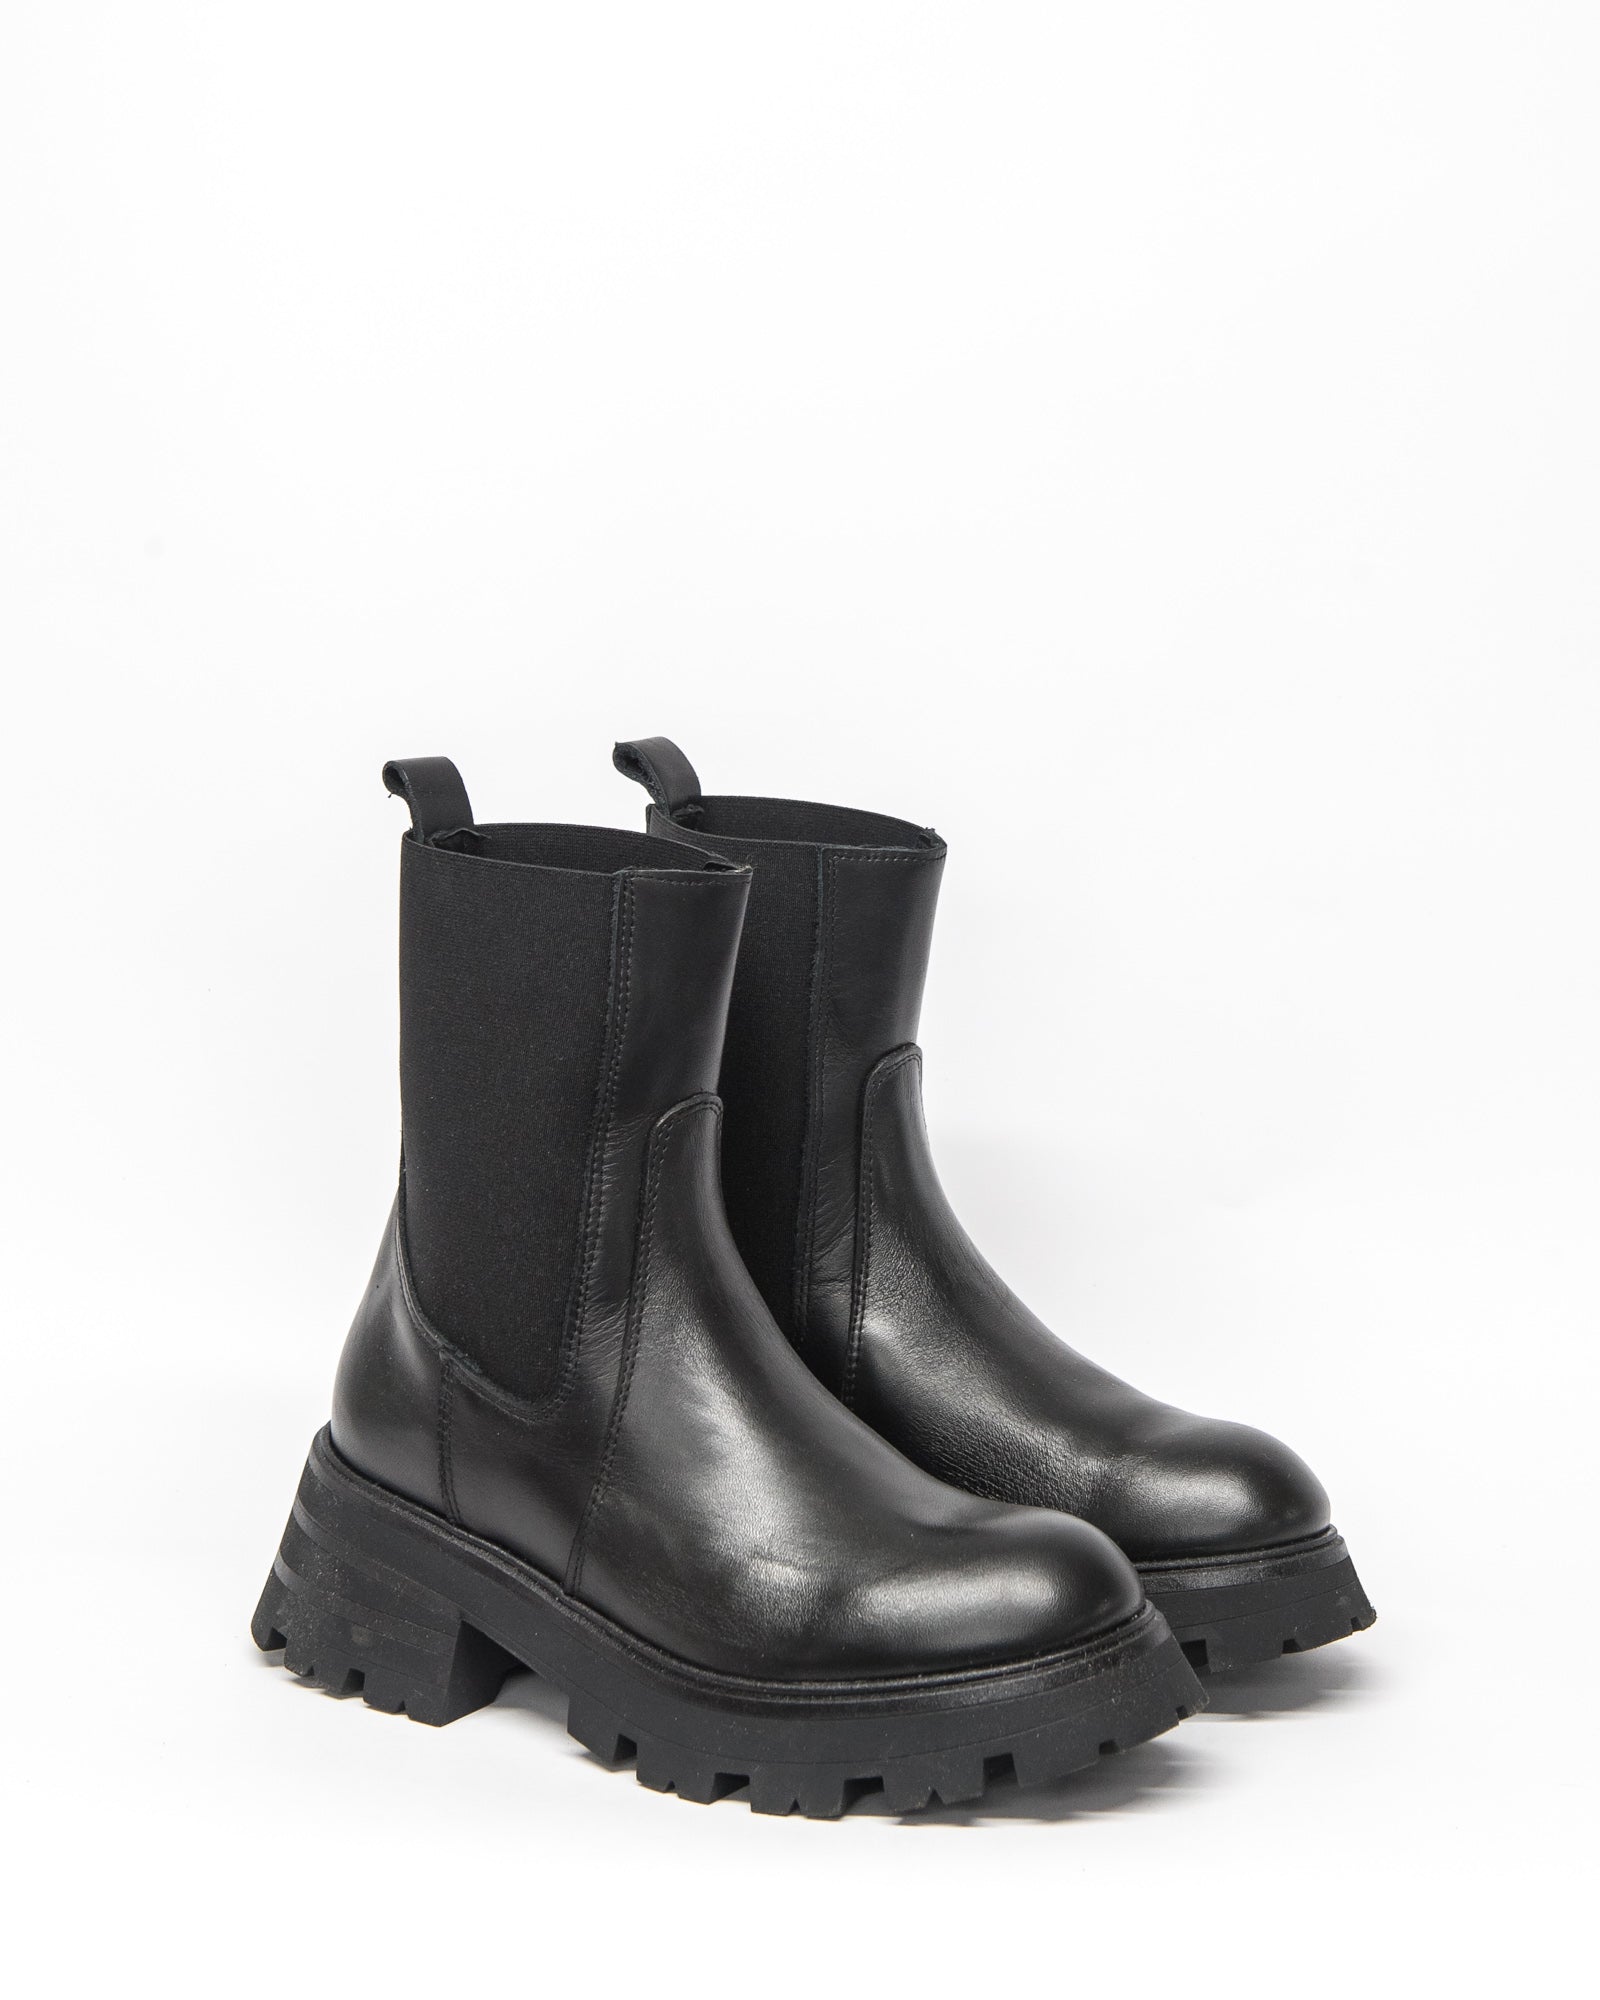 inset boot - black leather